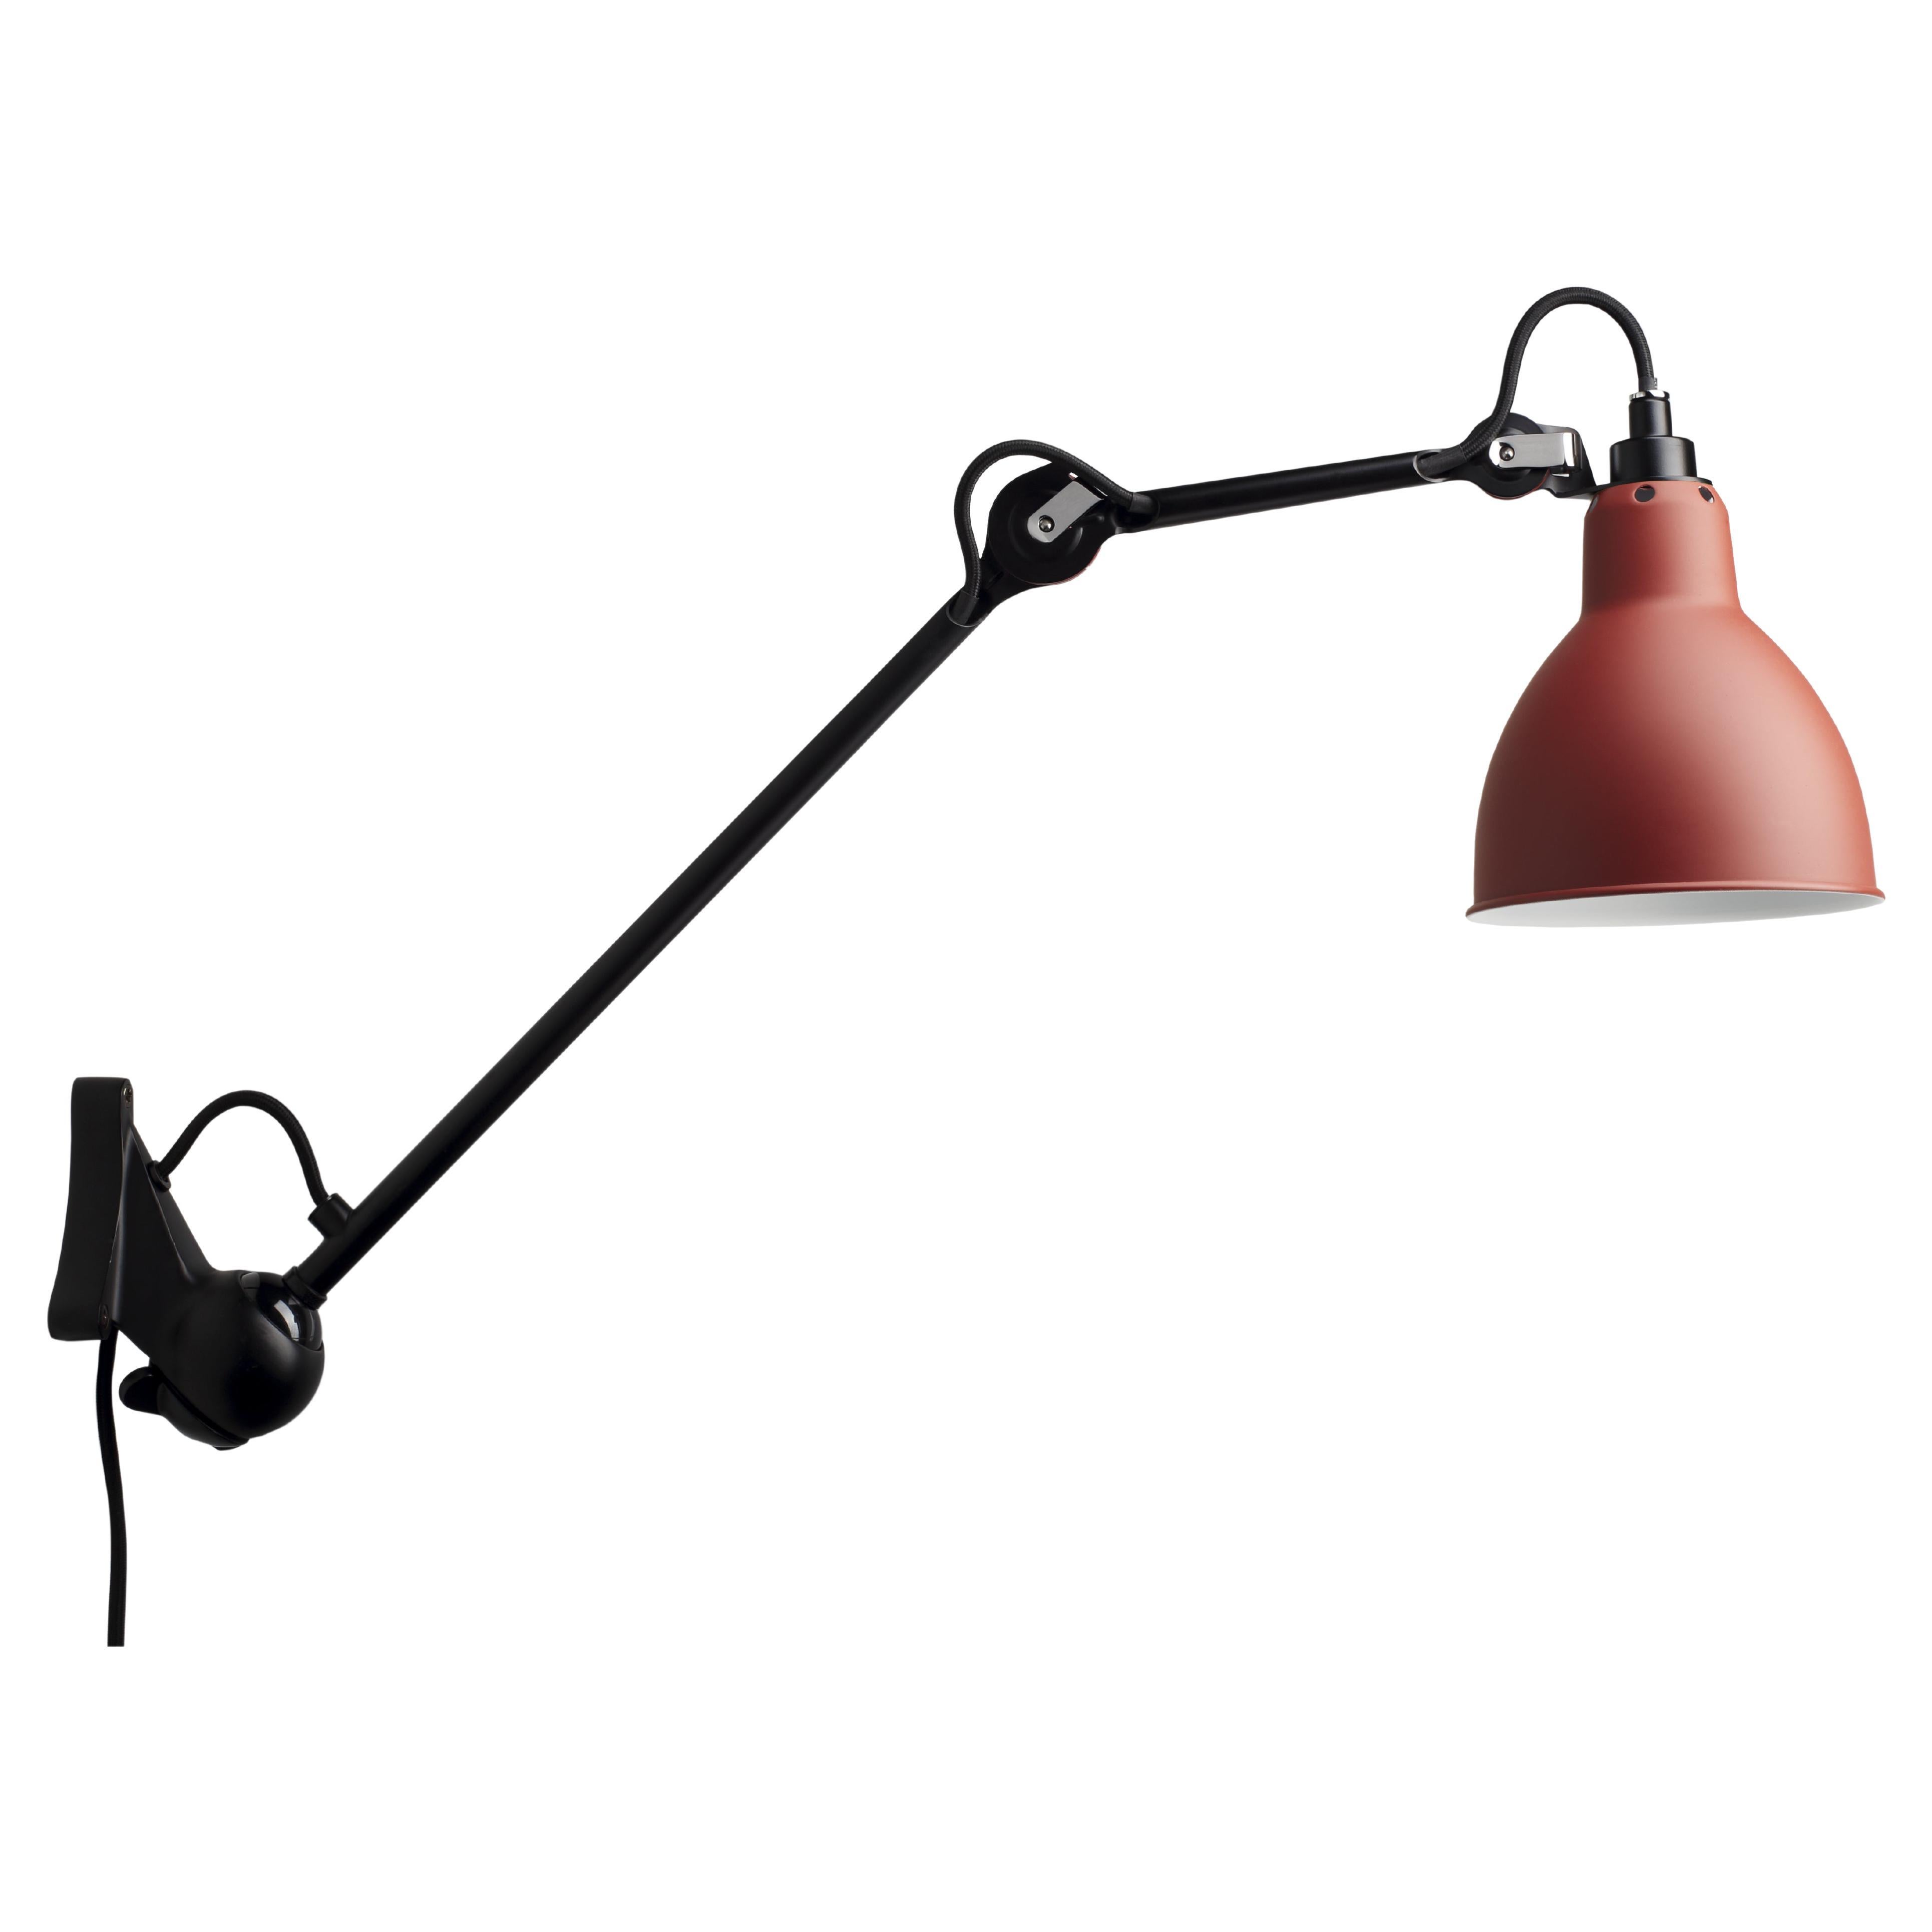 DCW Editions La Lampe Gras N°222 Wall Lamp in Black Arm and Red Shade For Sale